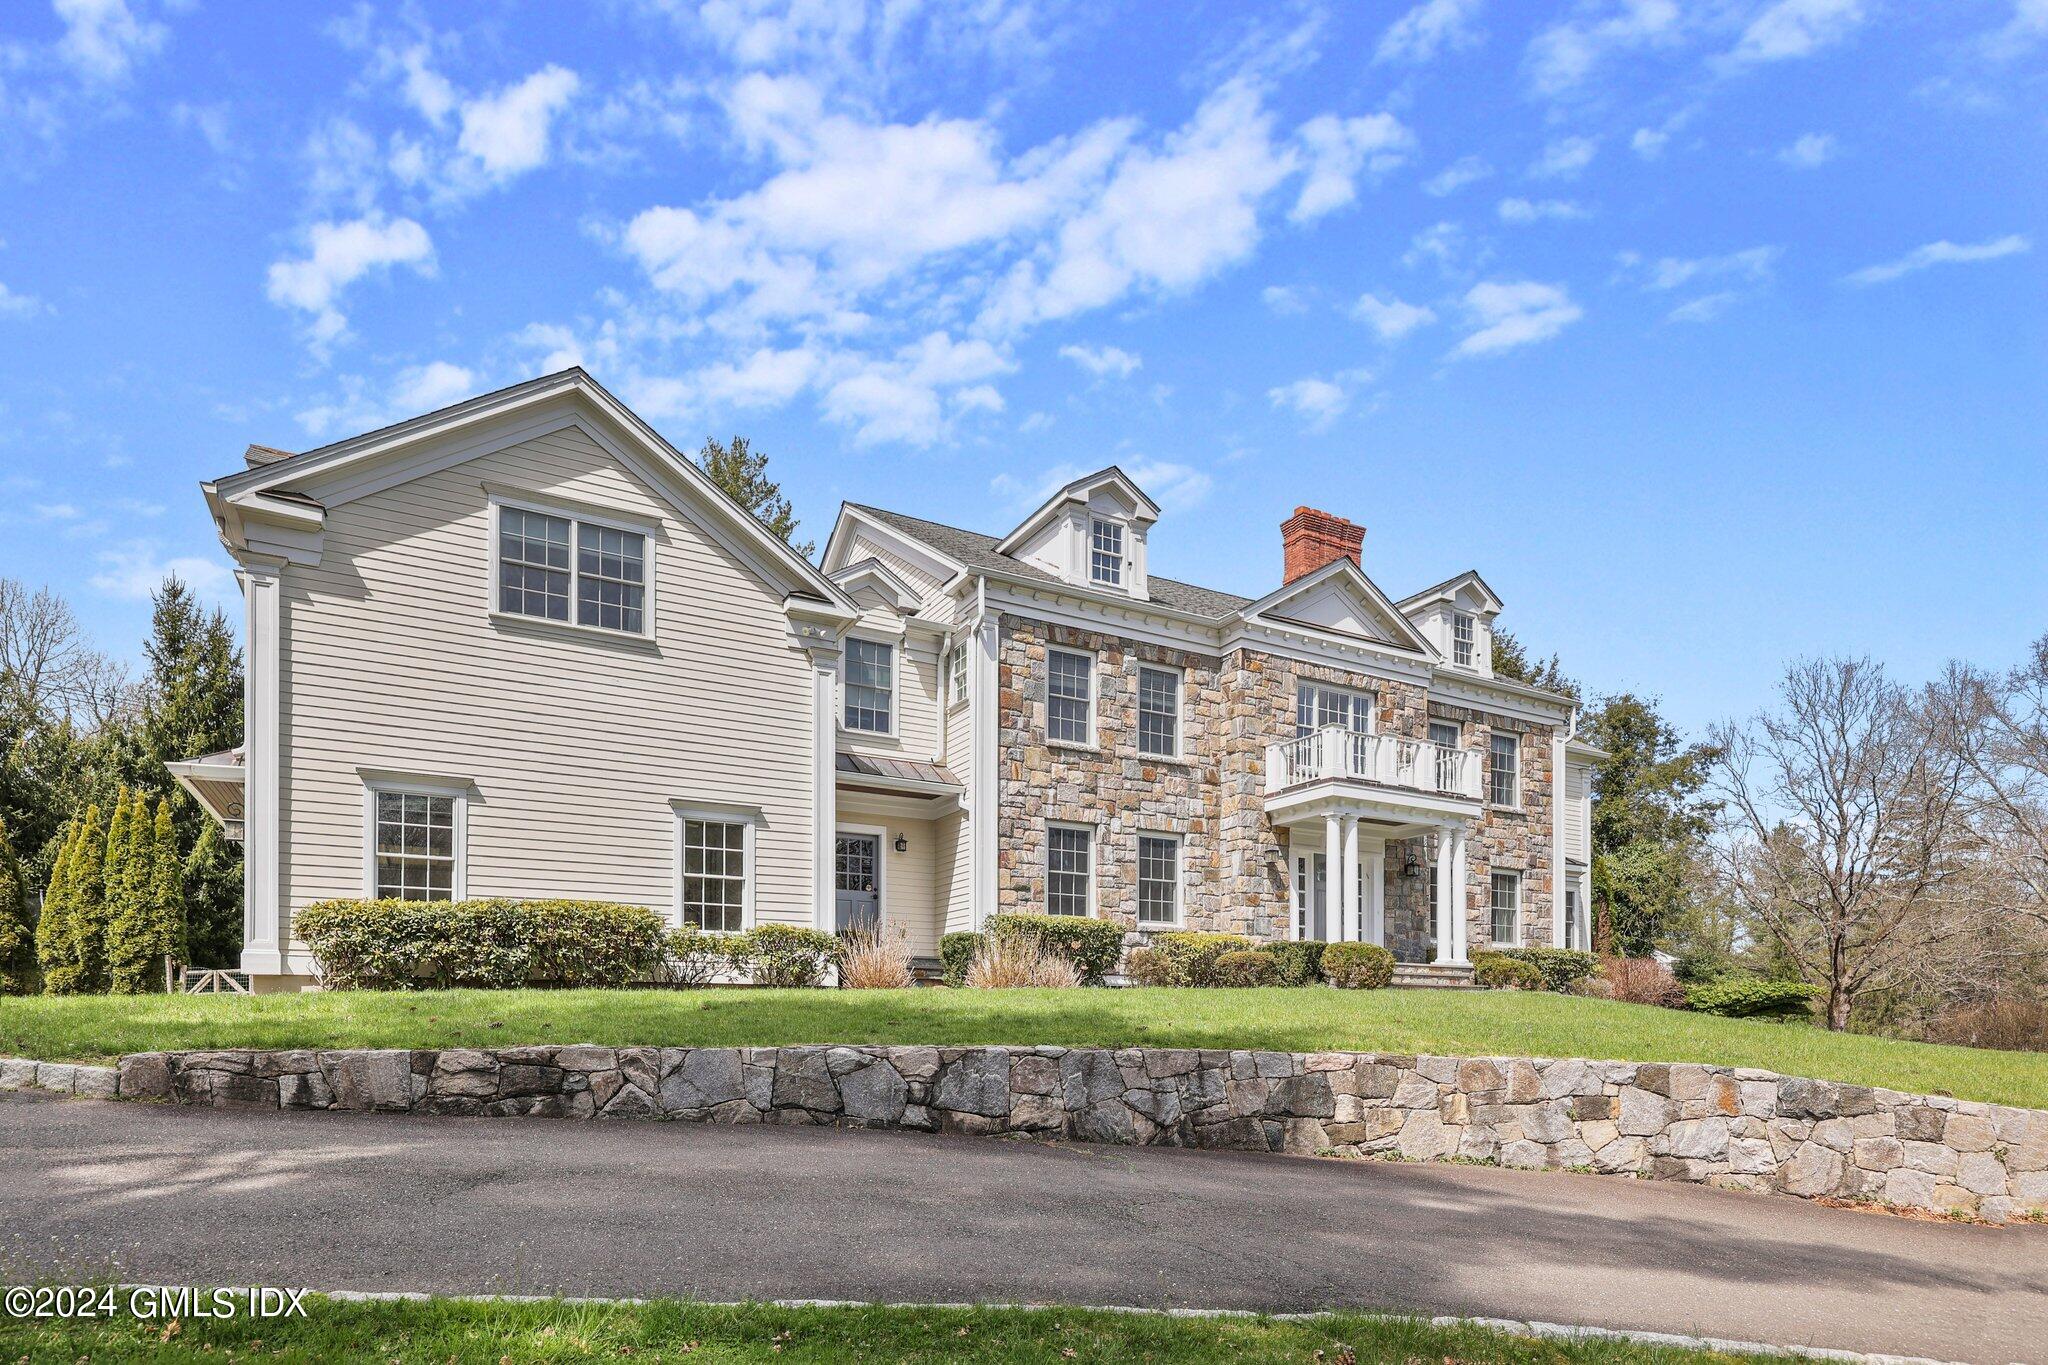 Rental Property at 6 Coachlamp Lane, Greenwich, Connecticut - Bedrooms: 5 
Bathrooms: 6.5  - $26,500 MO.